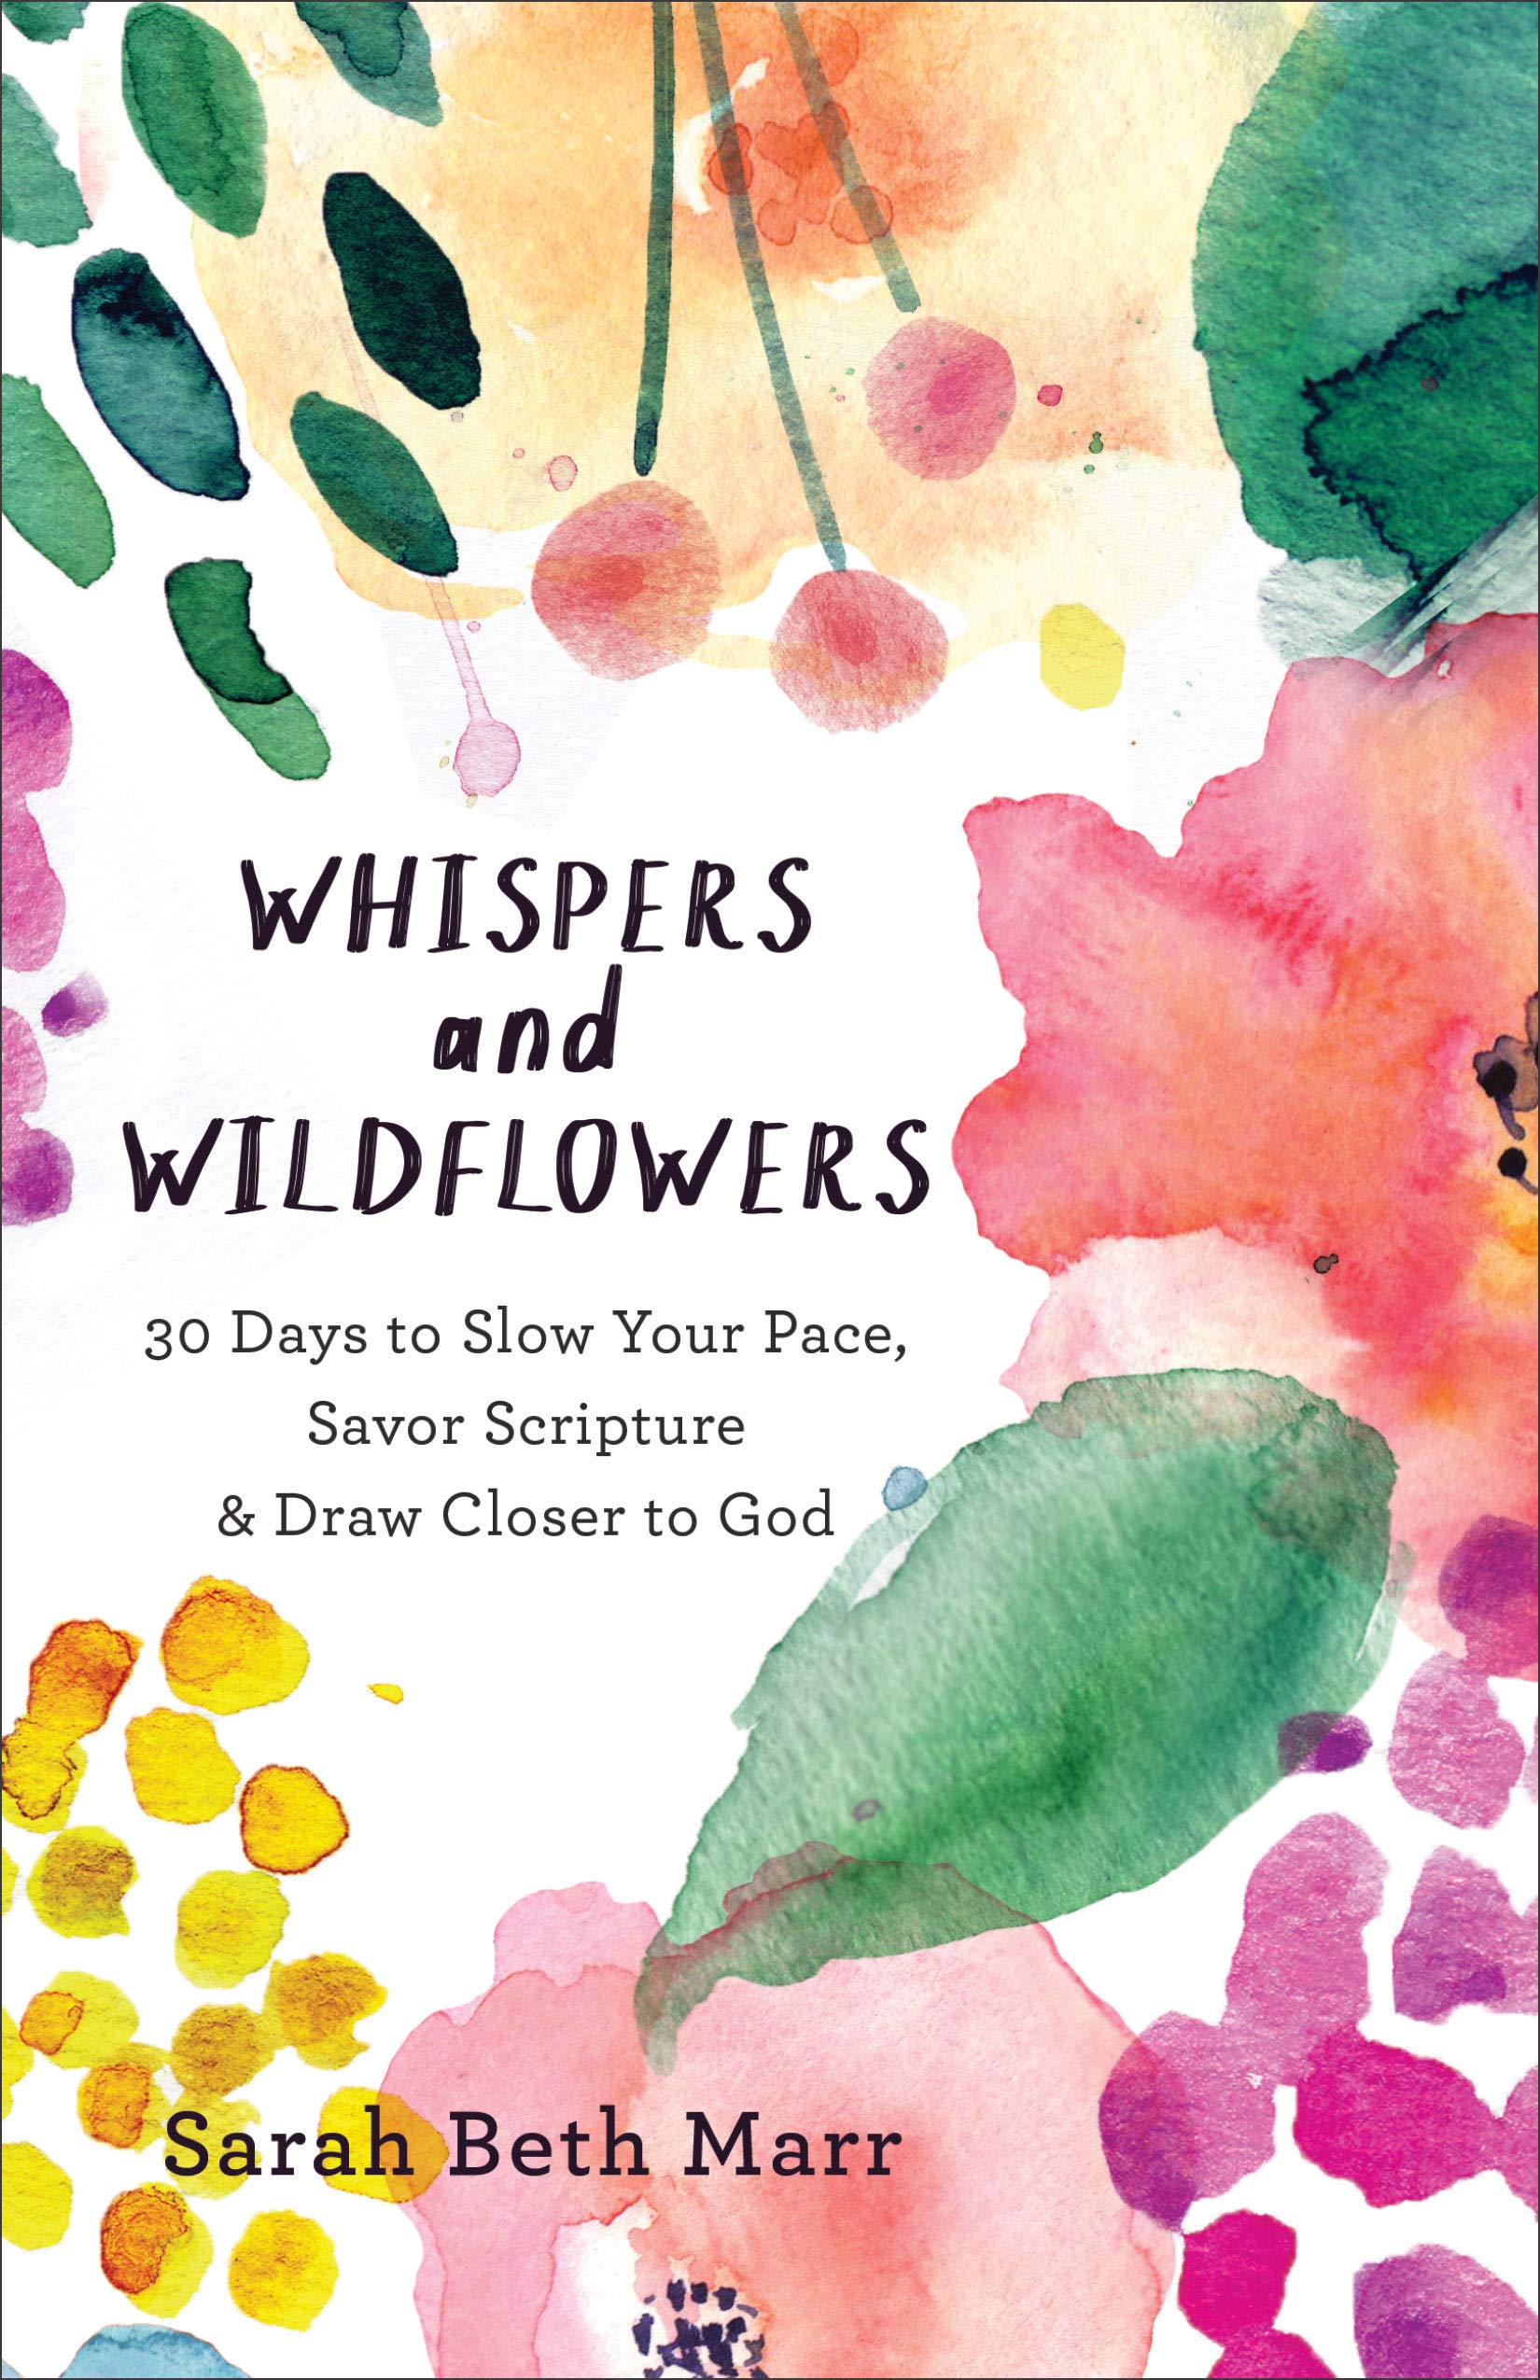 Whispers and Wildflowers: 30 Days to Slow Your Pace, Savor Scripture & Draw Closer to God